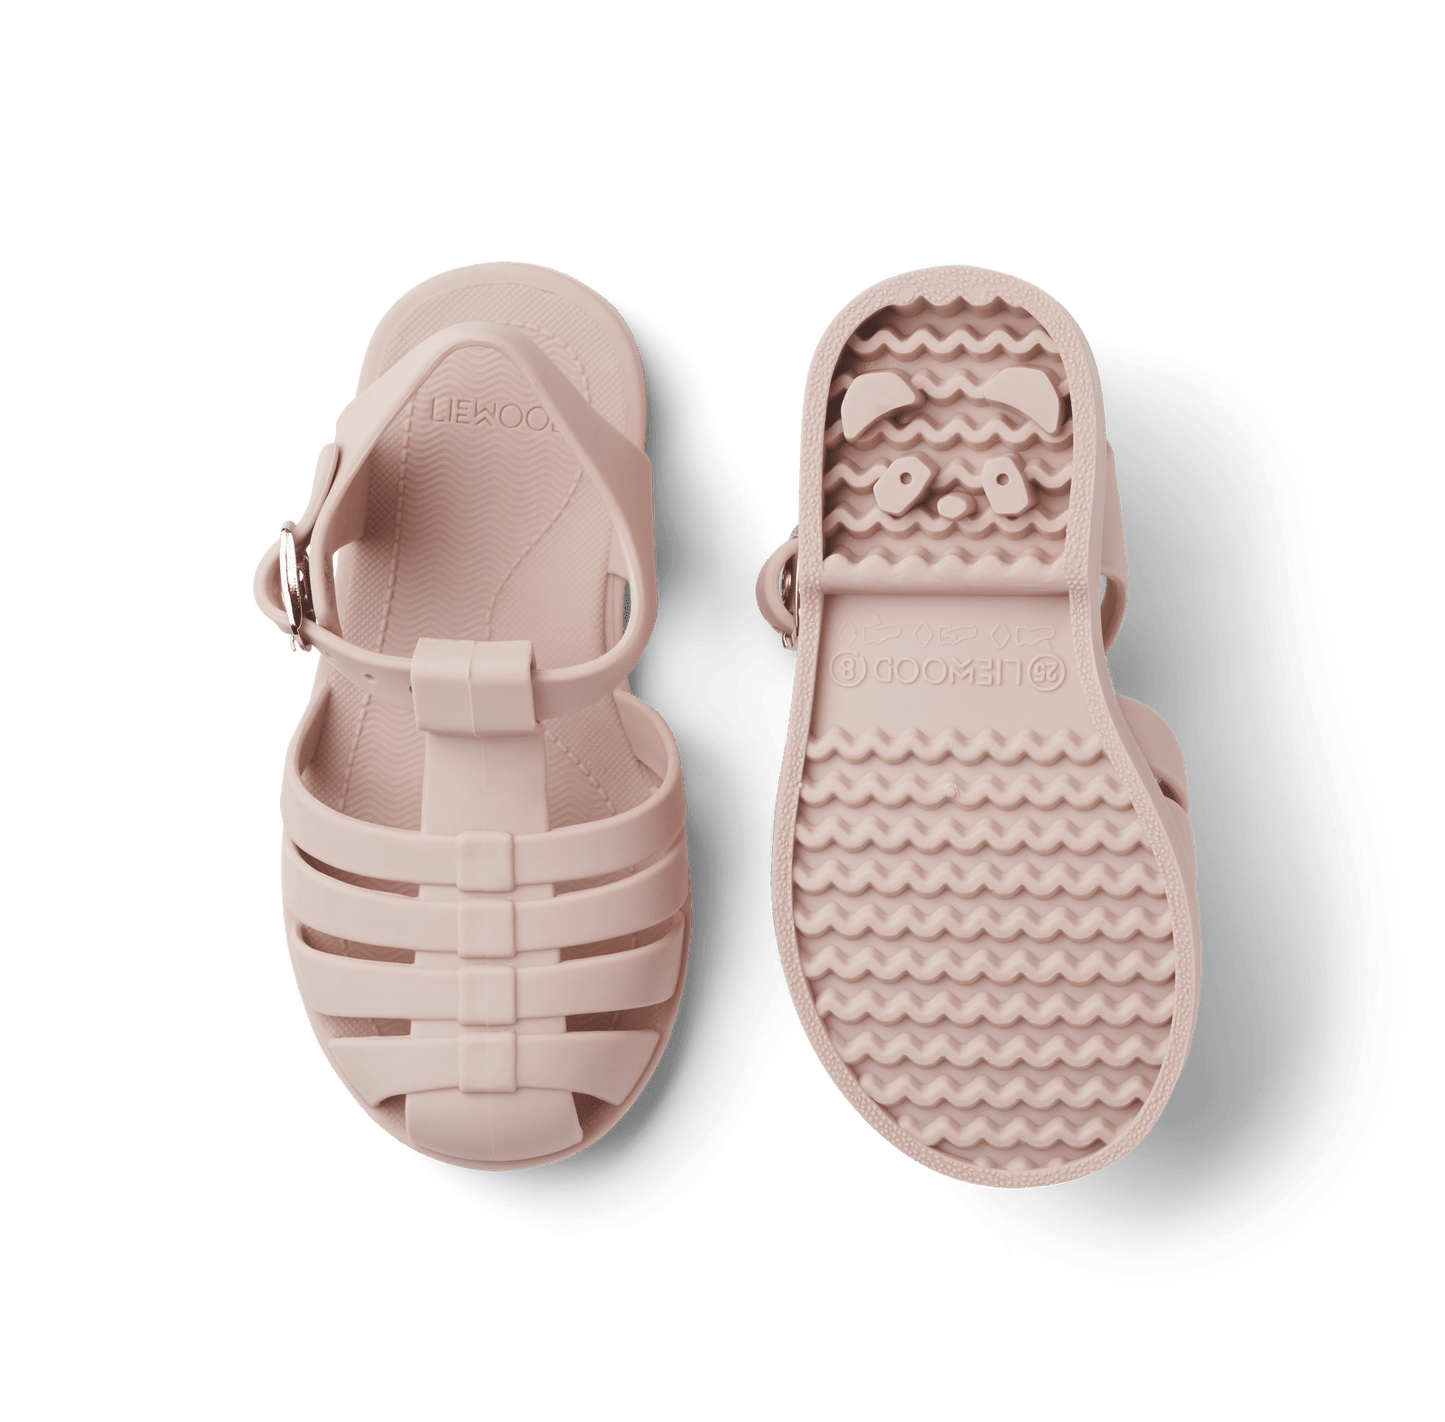 Liewood Kids Bre Sandals in Rose, Jelly Shoes, Kids Sandals, Beach Sandals, Nottingham Liewood Stockist, Kids Shop, Liewood Jelly Sandals 